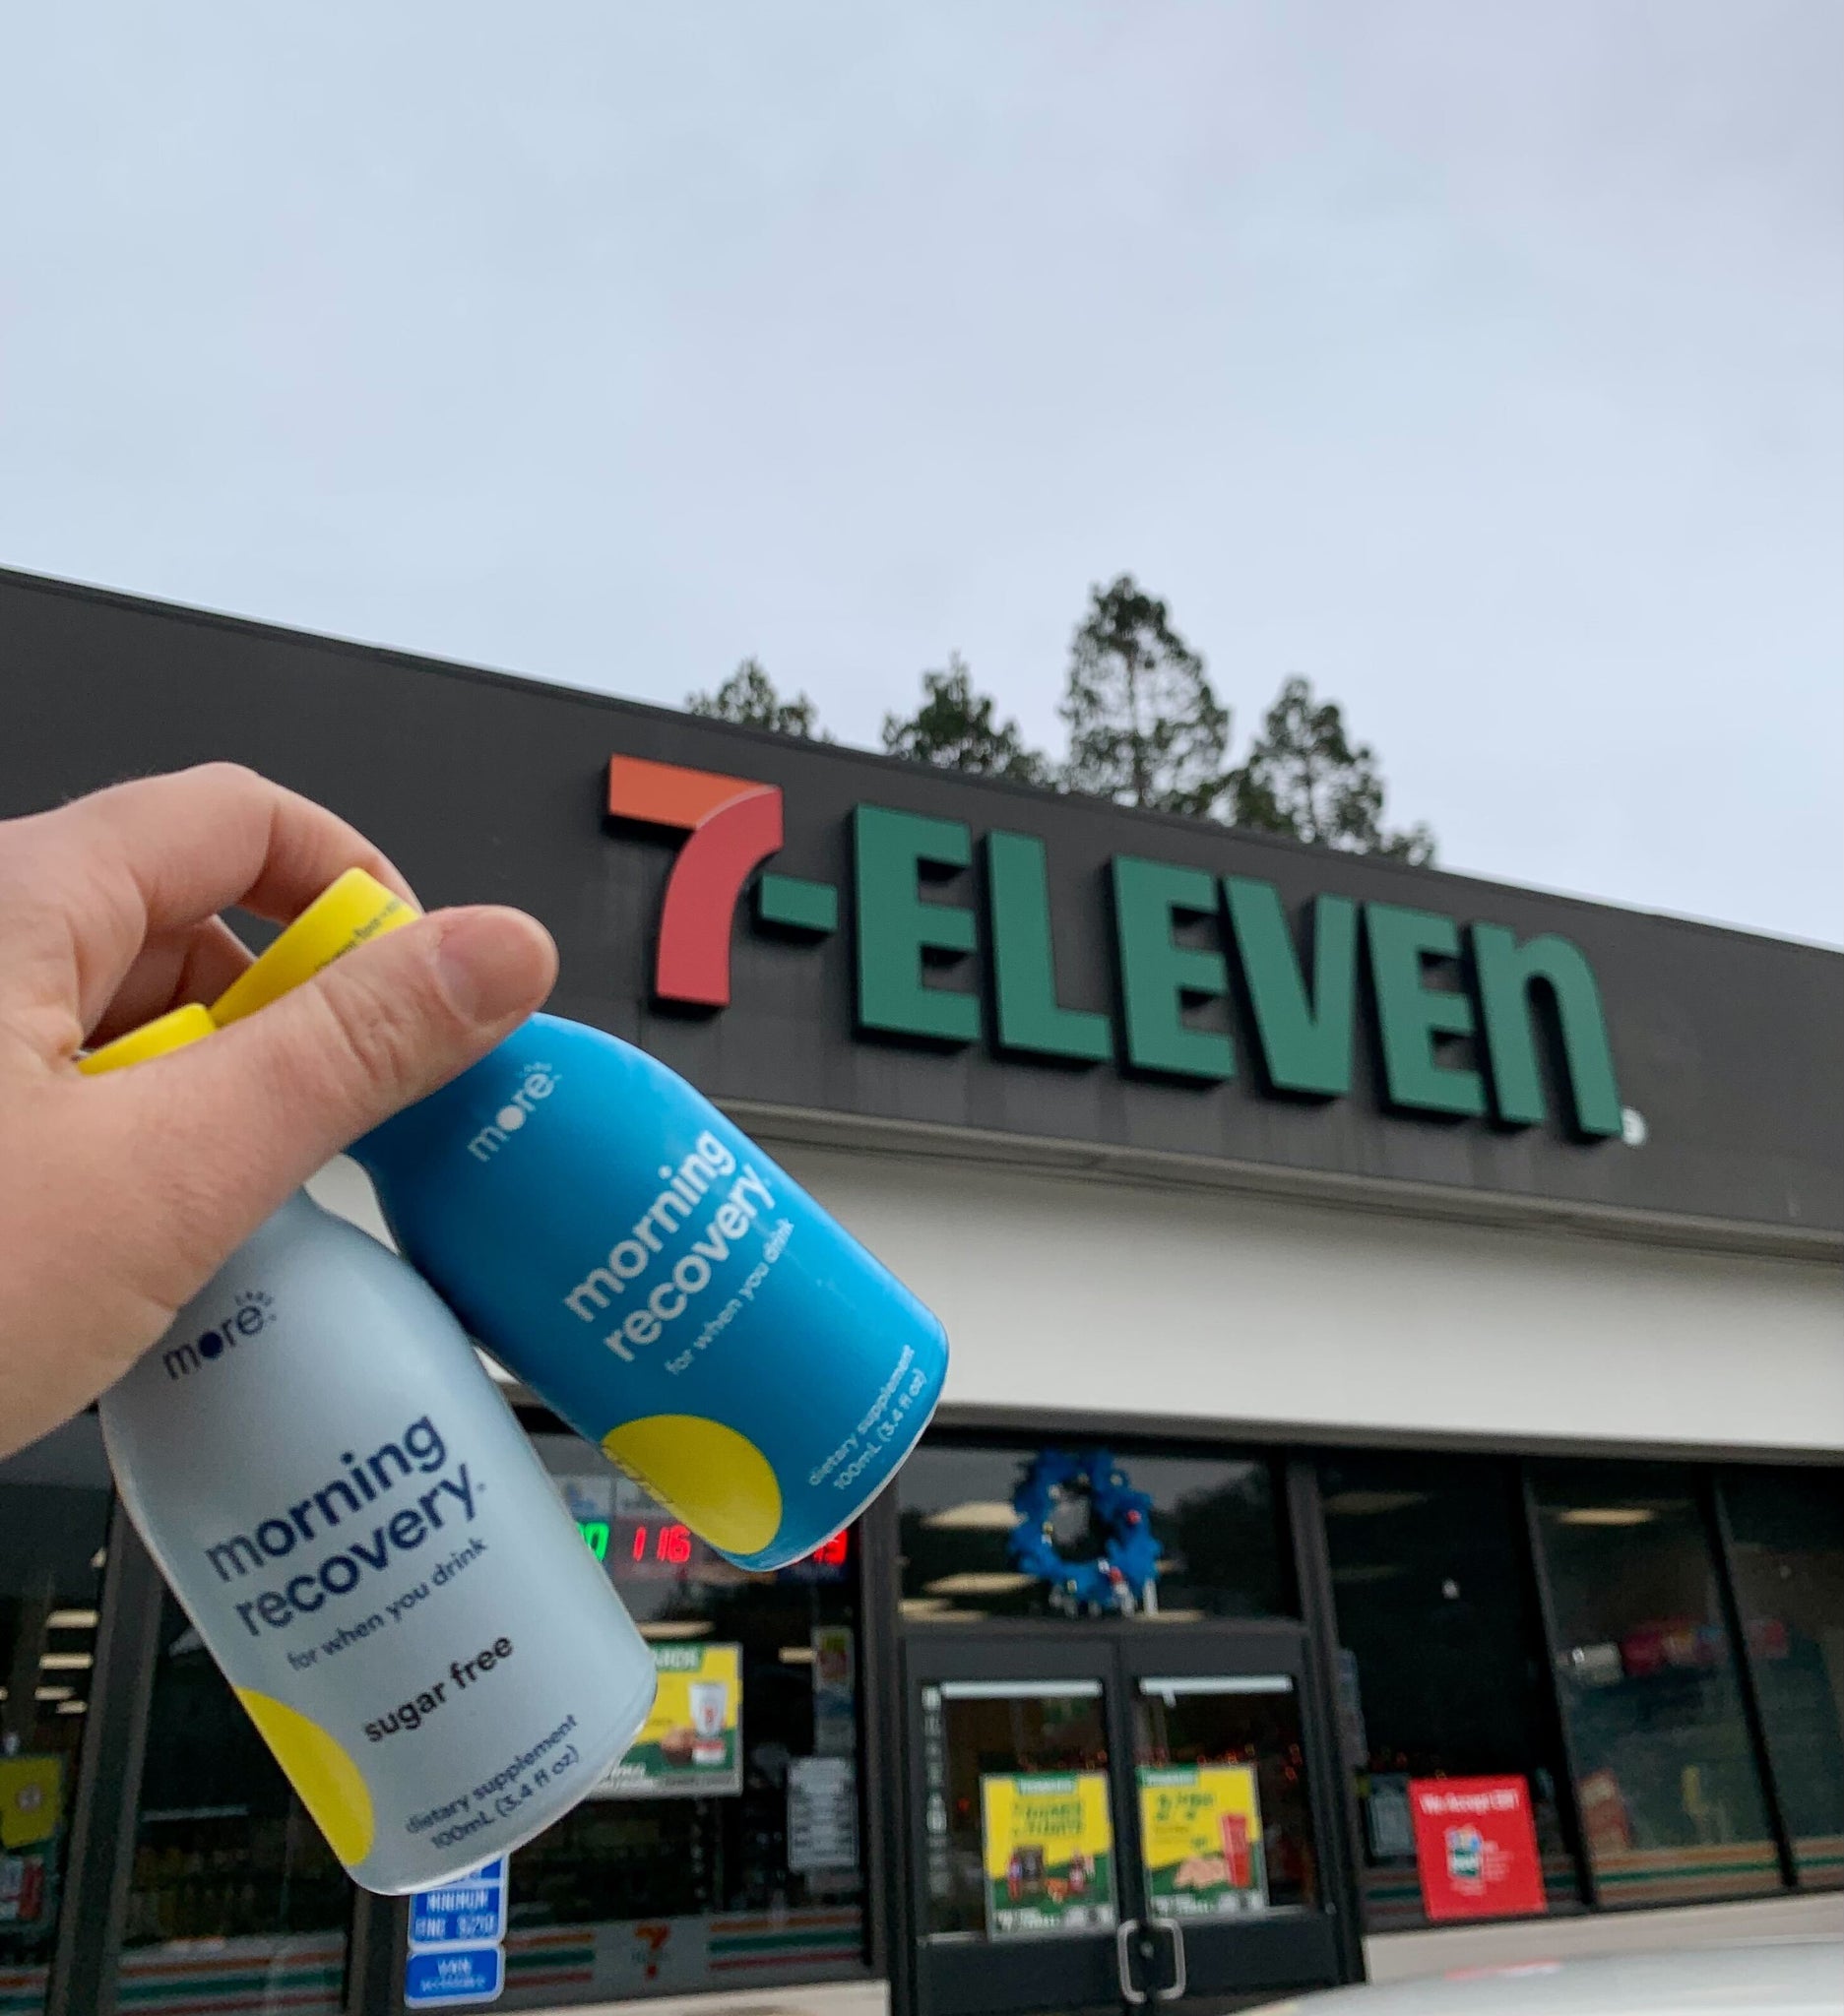 You can buy Morning Recovery at 7-Eleven in Chicago & Los Angeles.